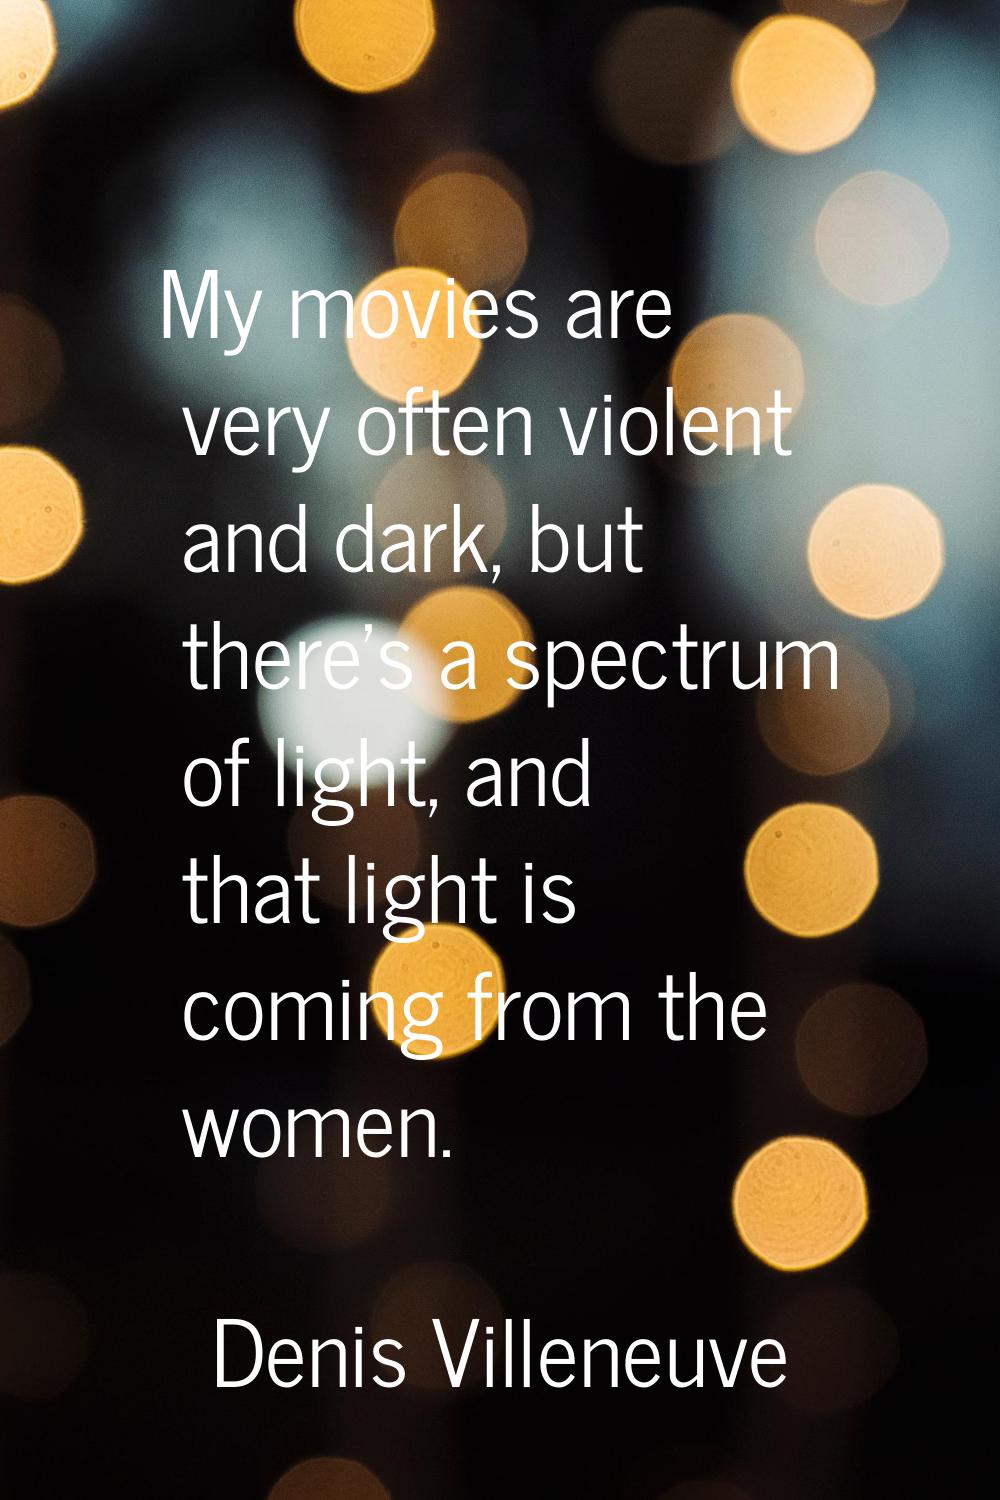 My movies are very often violent and dark, but there's a spectrum of light, and that light is comin